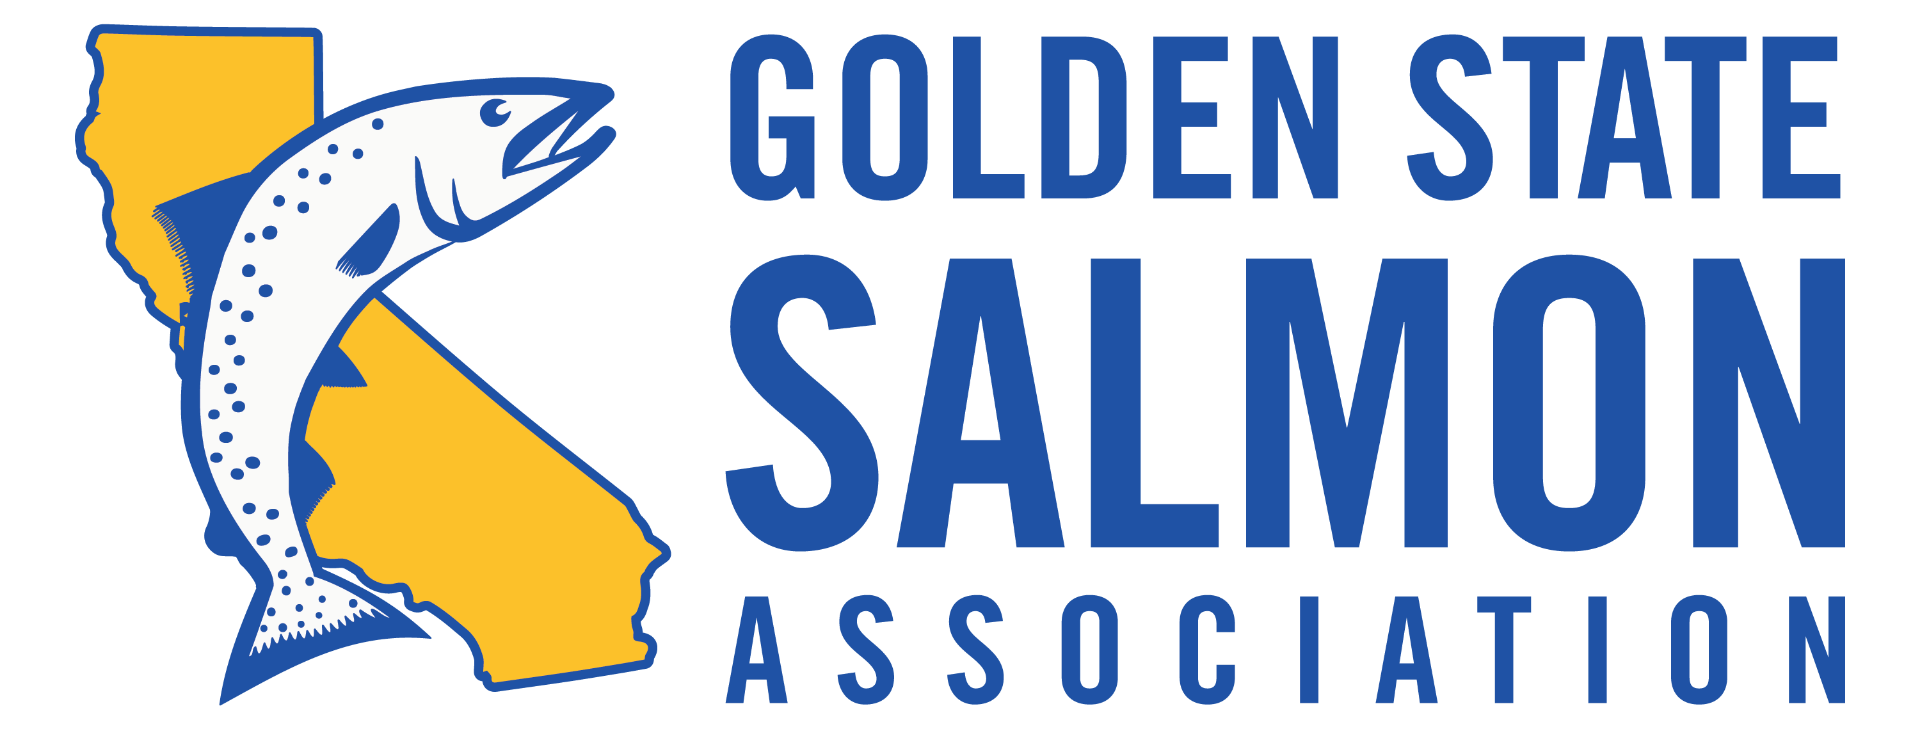  Golden Gate Salmon Association Changes Name to Golden State Salmon Association